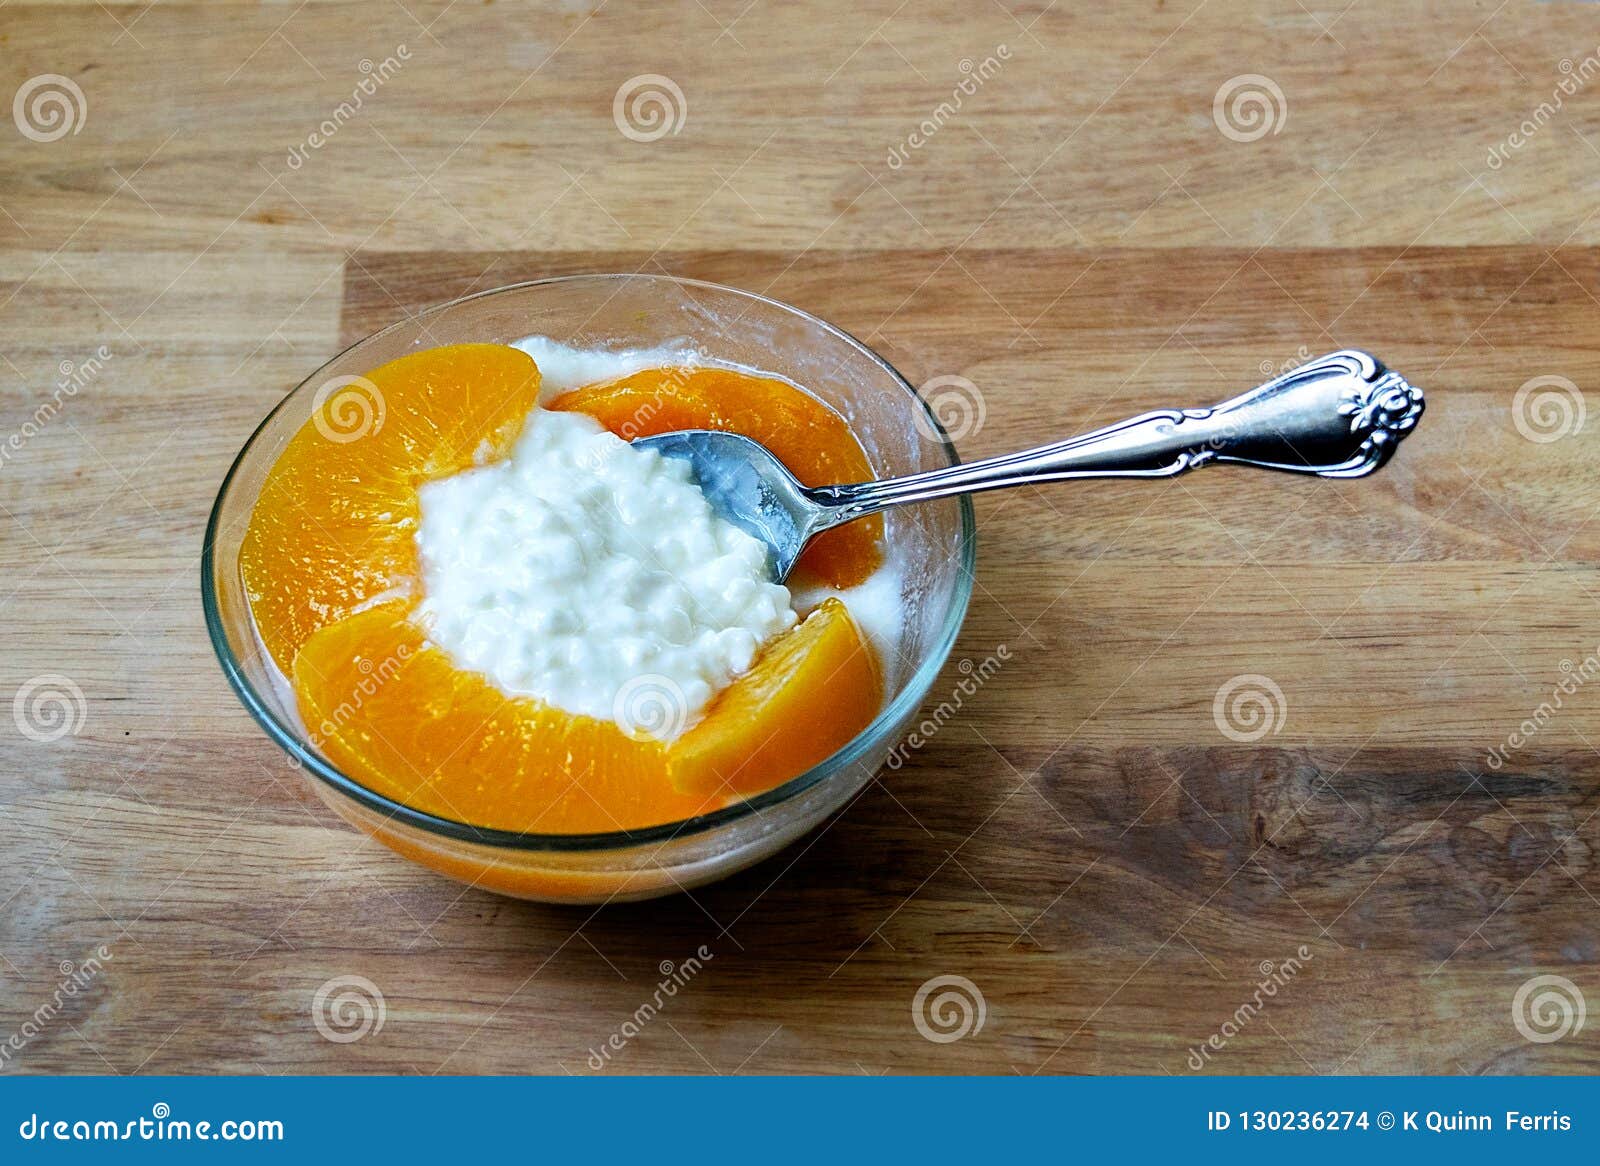 Typical Diet Food Of Cottage Cheese And Peaches Stock Photo